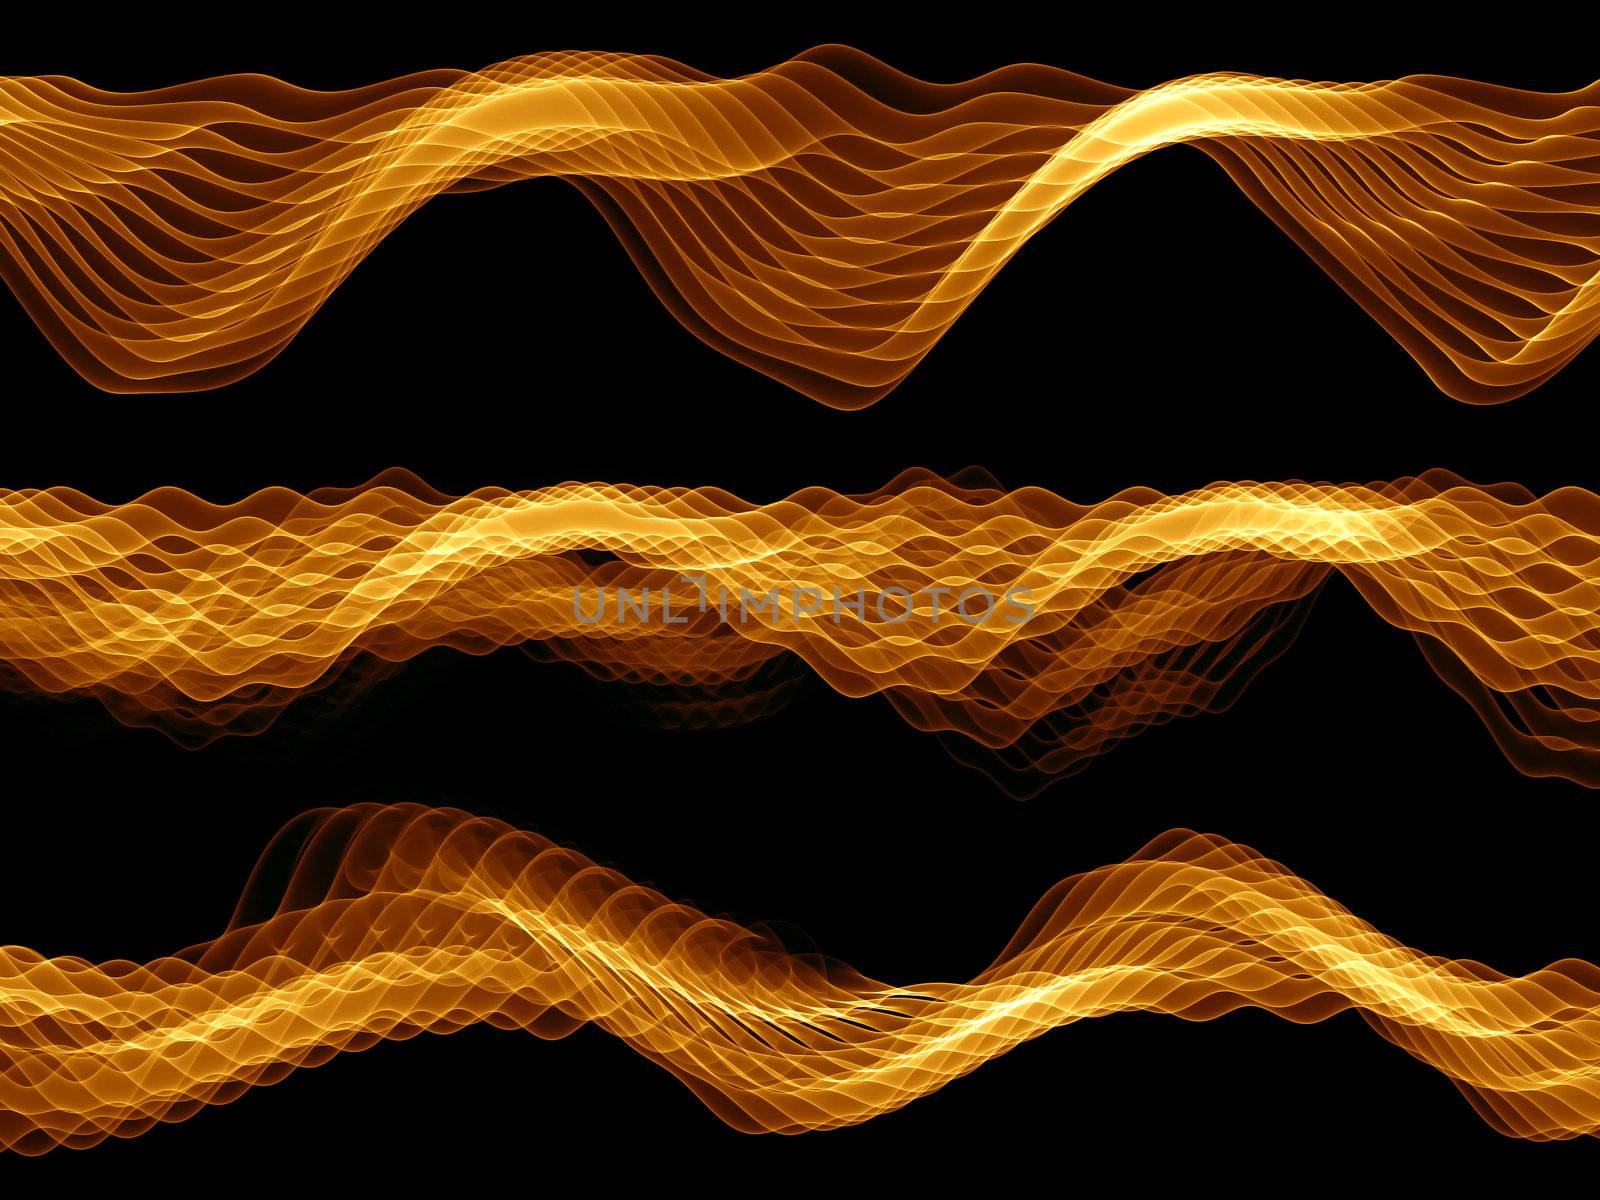 Abstract sine waves rendered in gold against black background